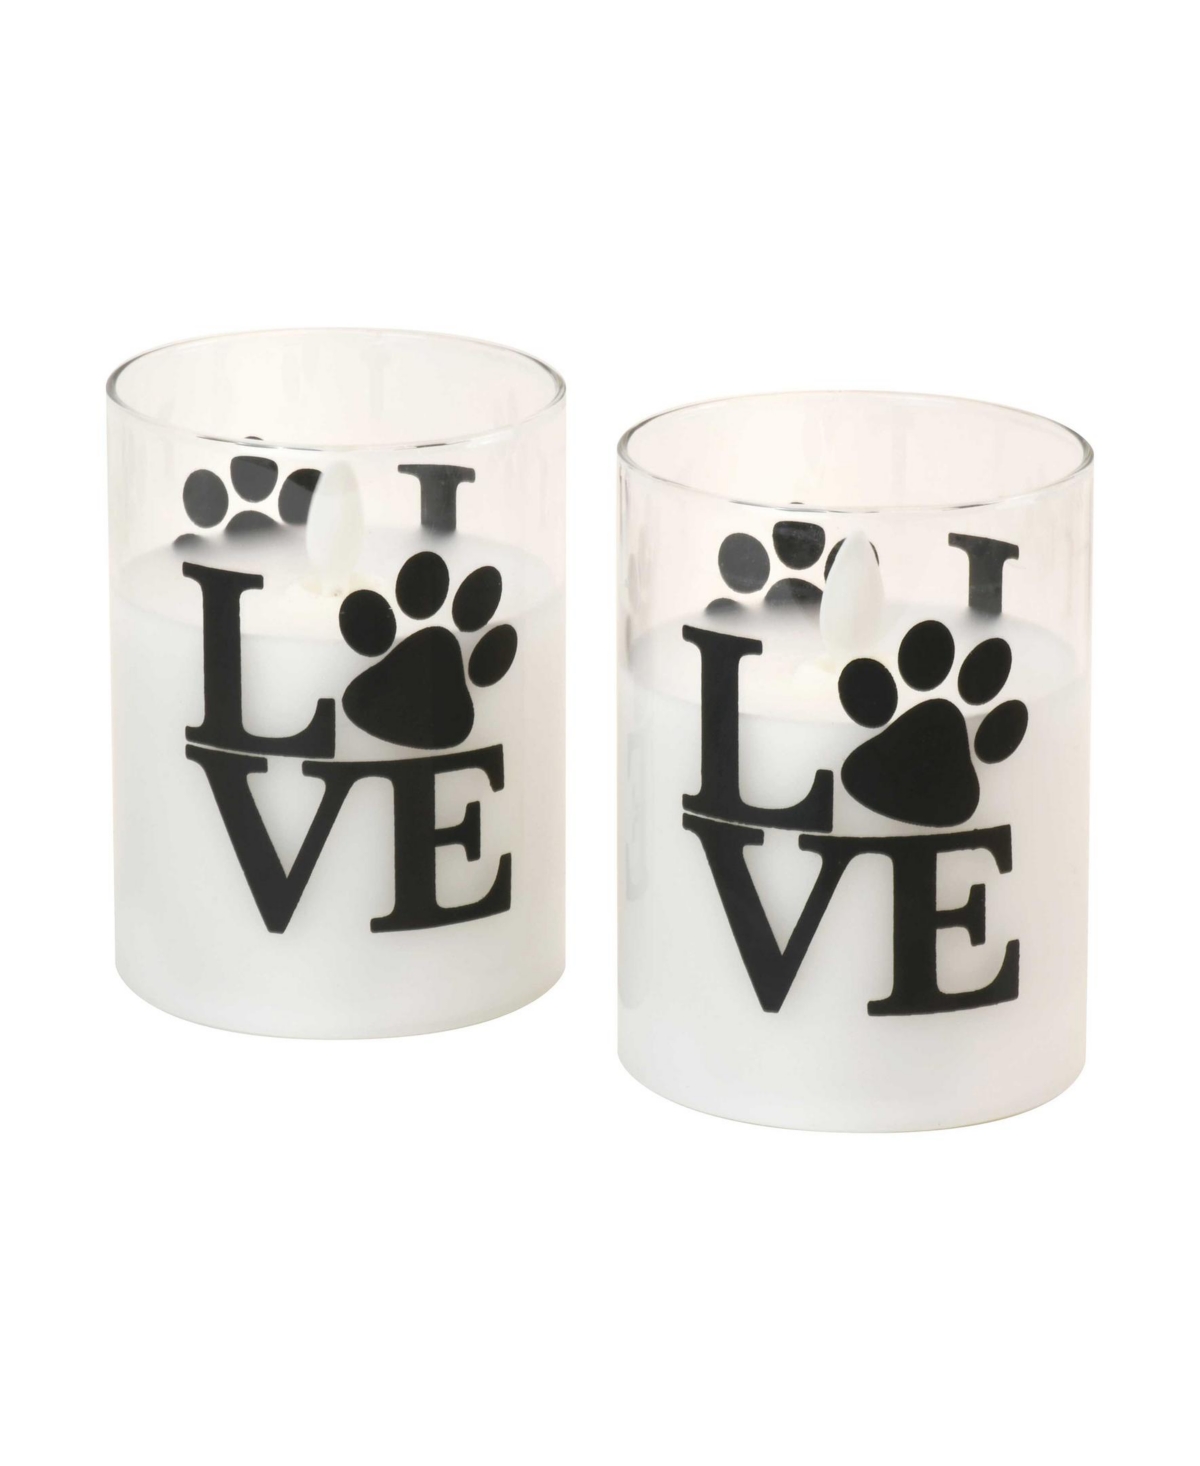 Battery Operated Love Paw Led Glass Candles with Moving Flame, Set of 2 - Black